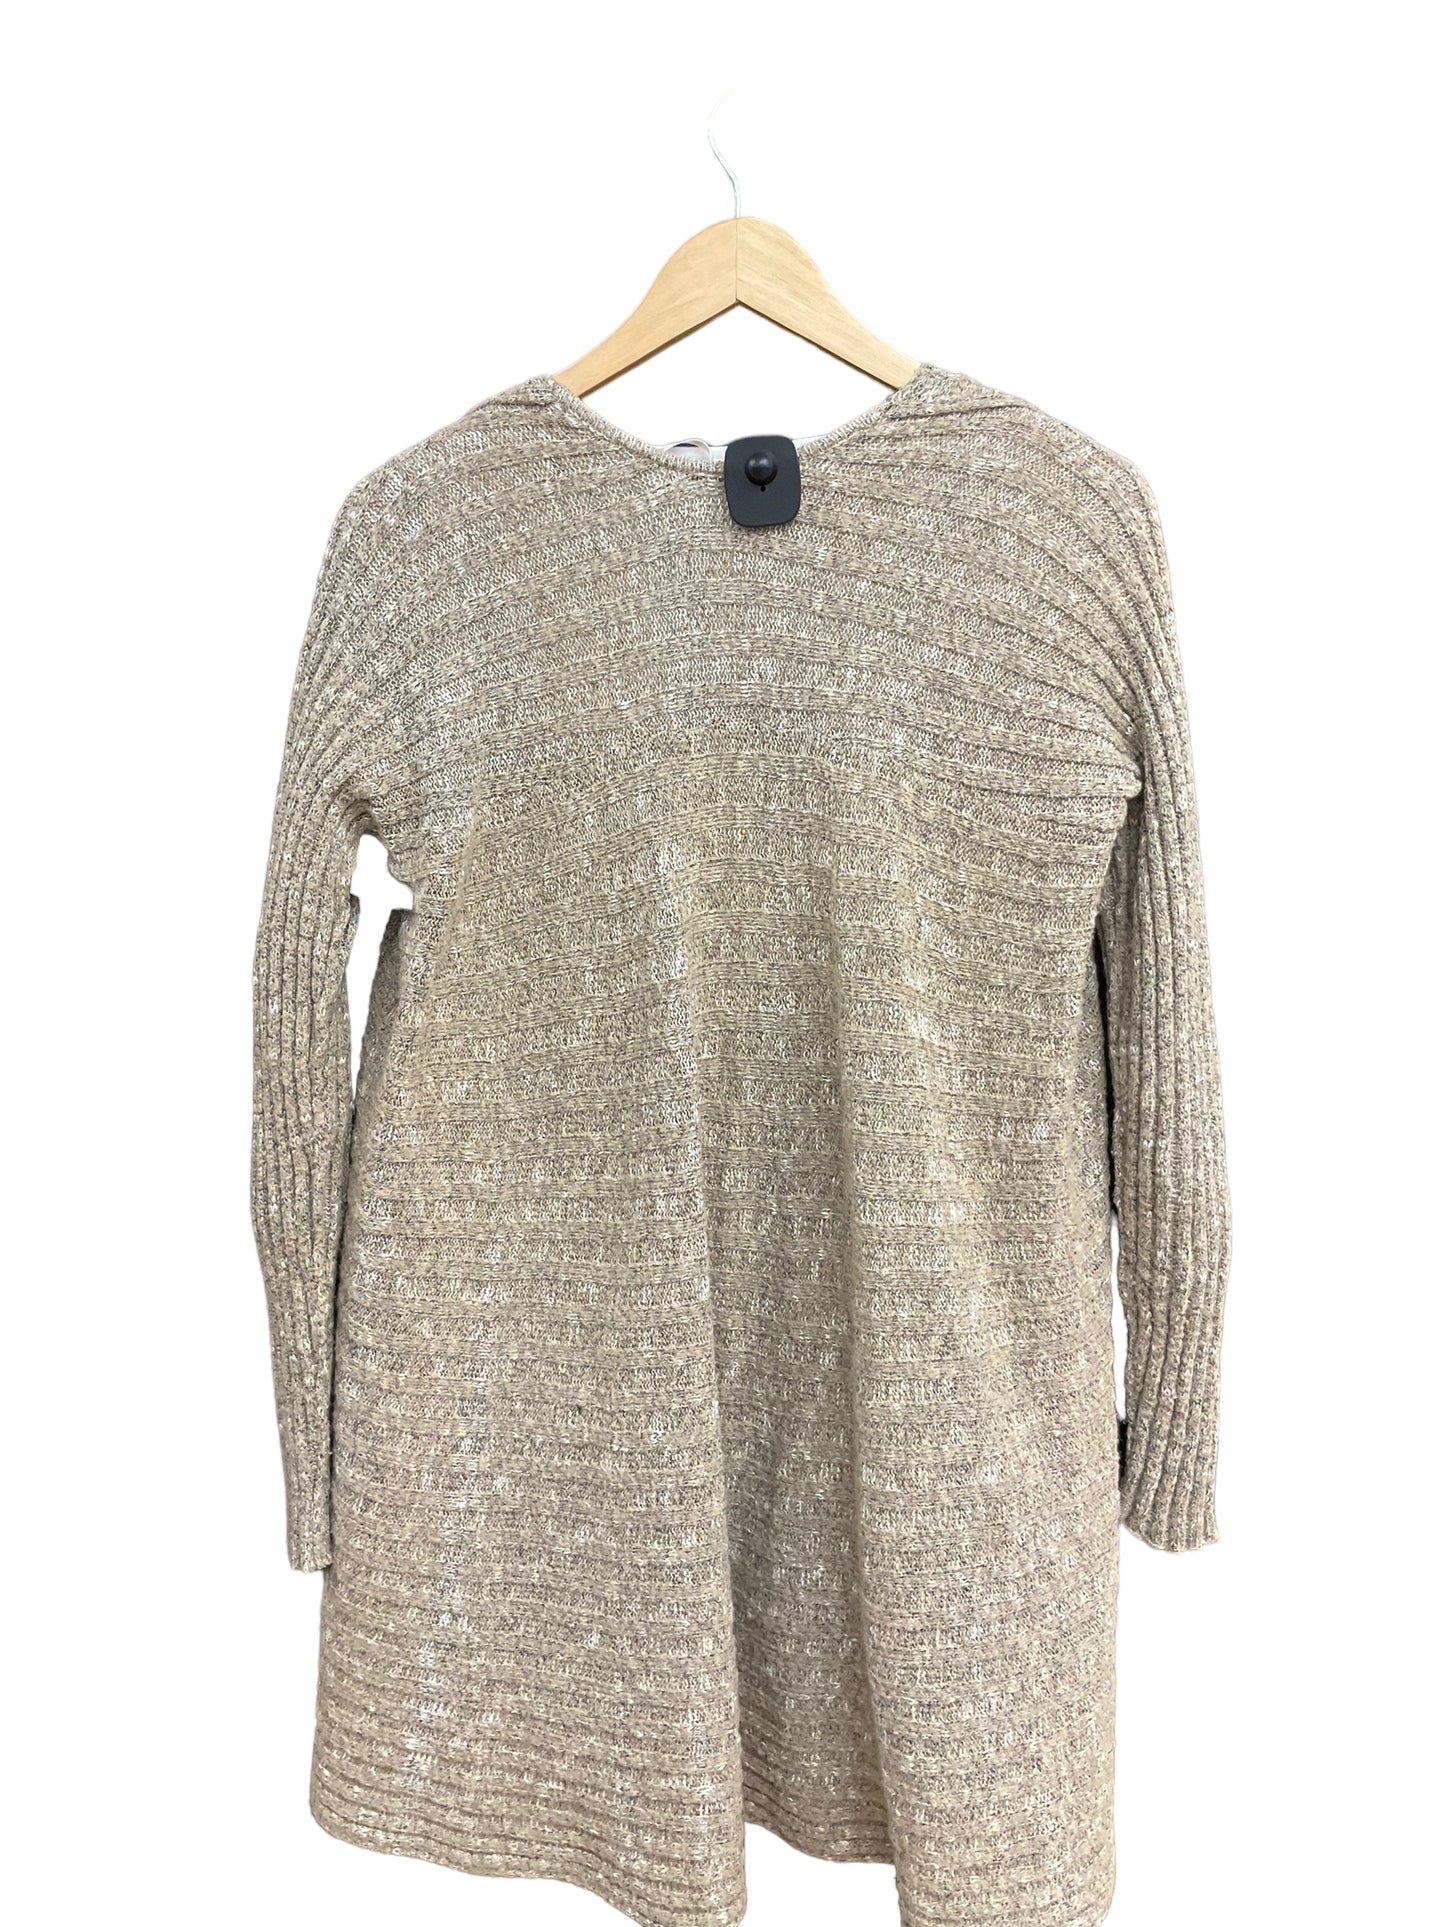 Sweater Cardigan By Free People  Size: S